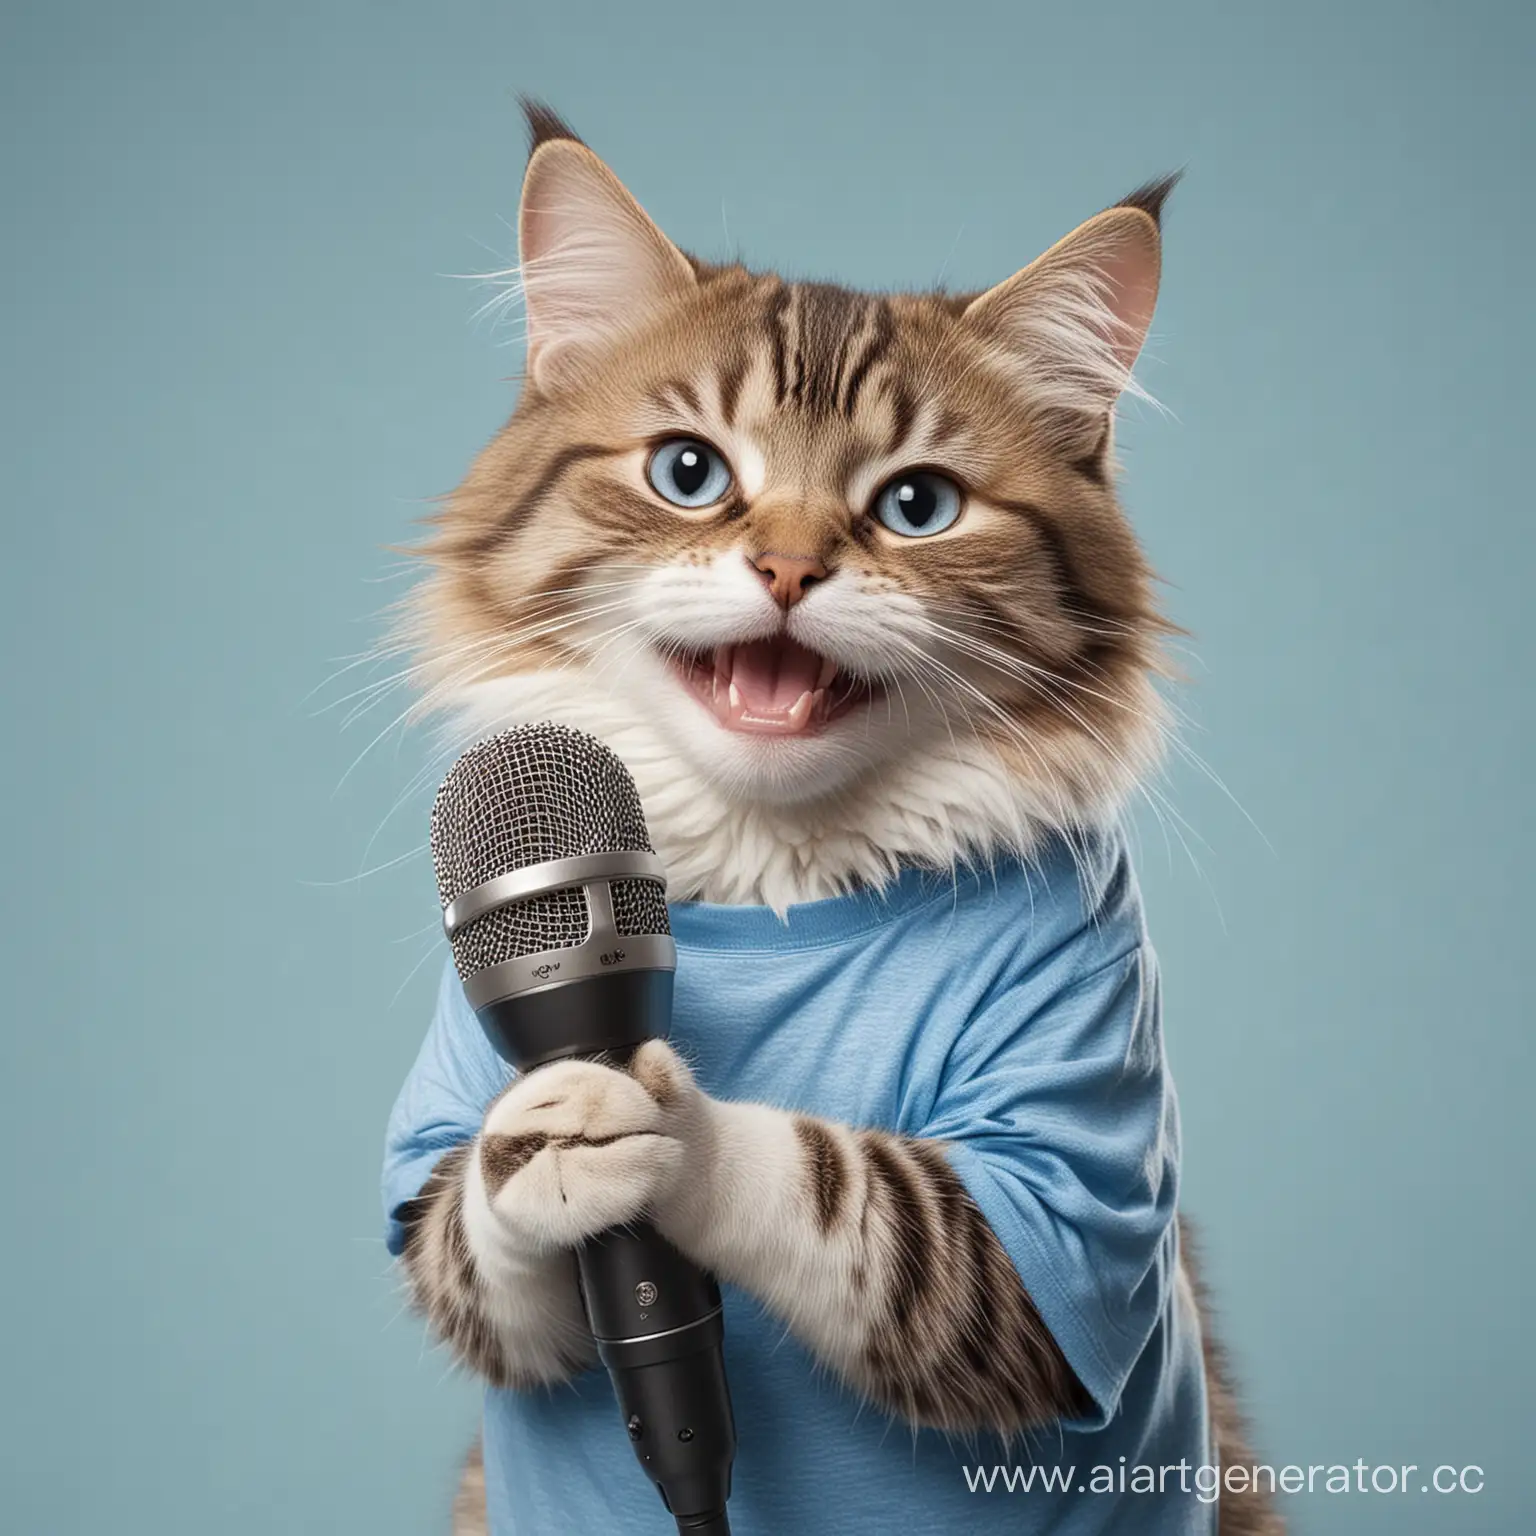 Smiling-Cat-in-Blue-TShirt-Holding-a-Microphone